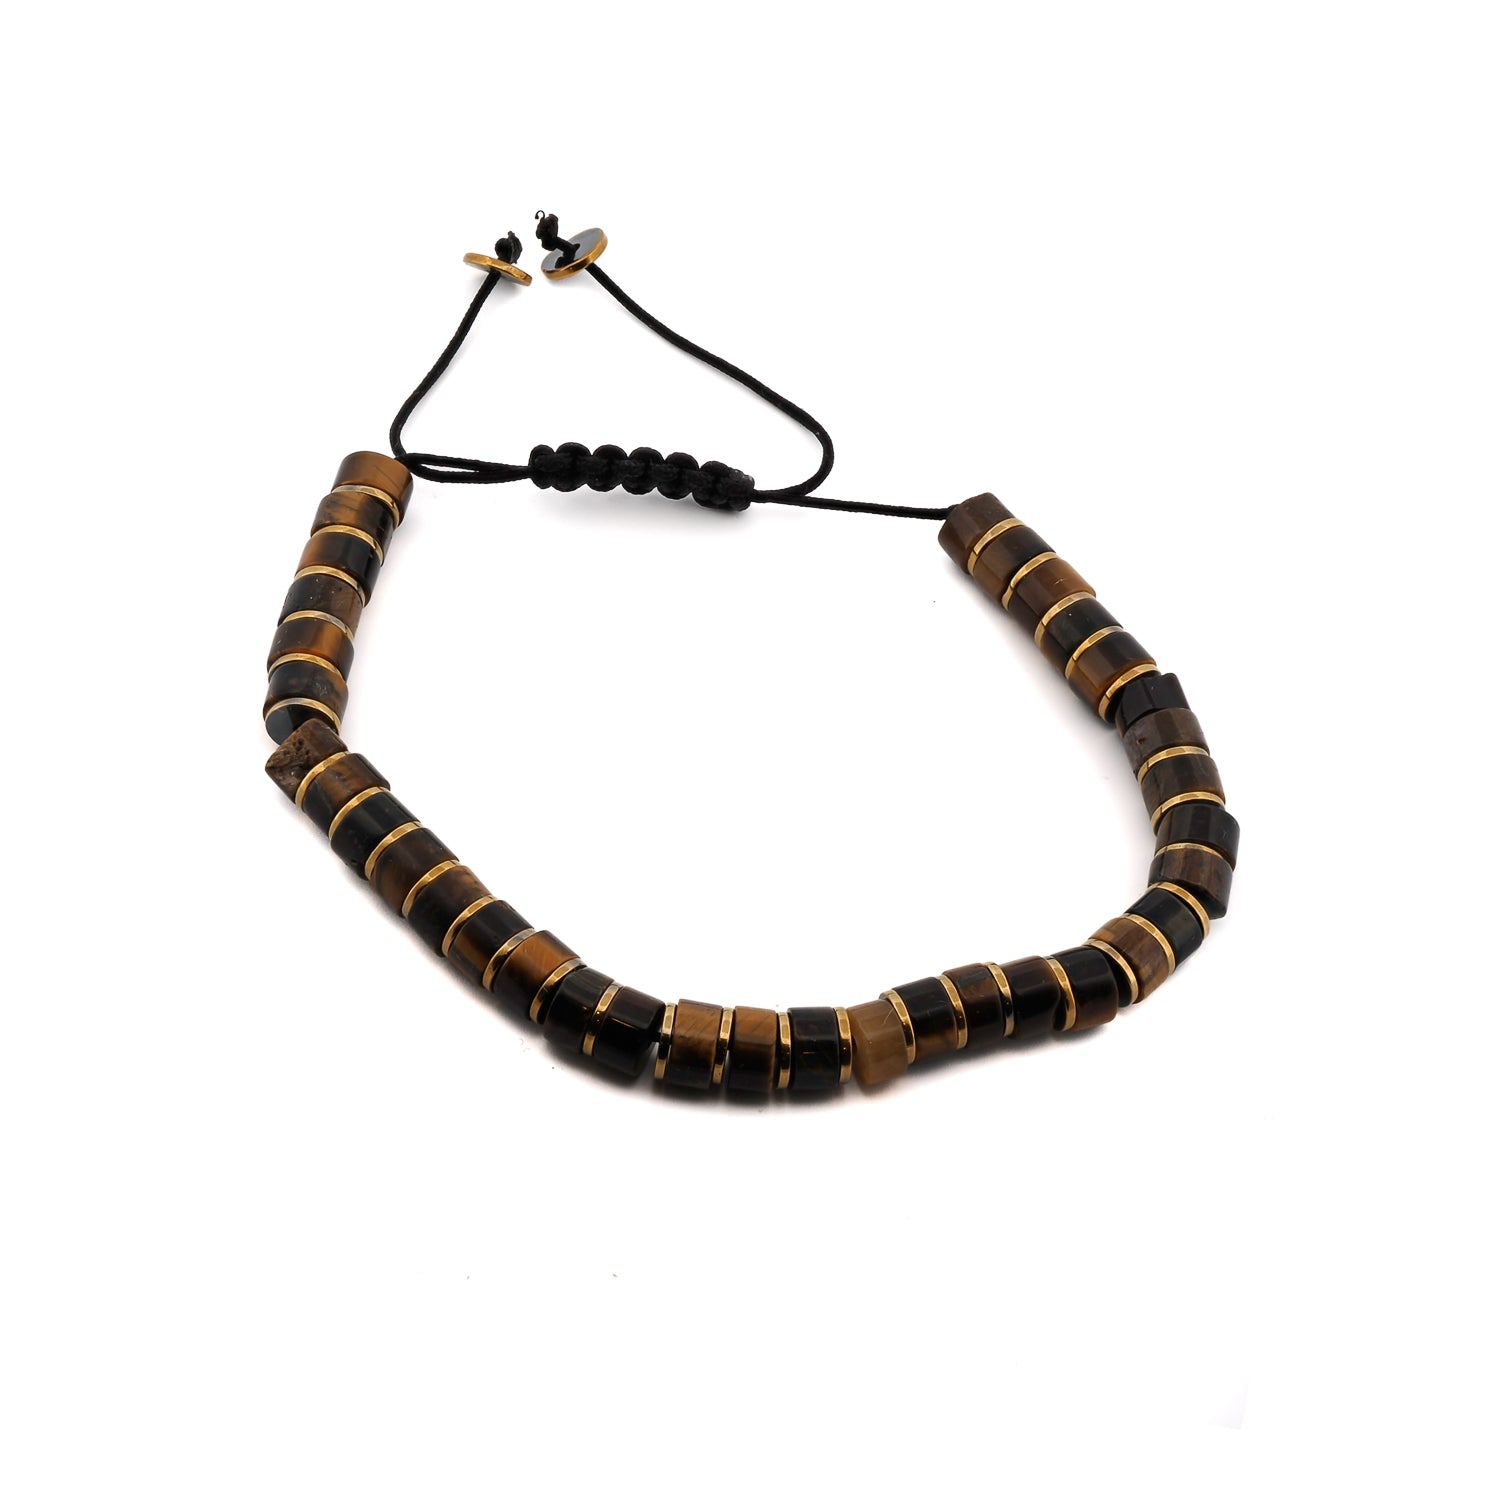 Men's Tiger's Eye Stone Adjustable Balance Bracelet with Brown Nugget Stones and Gold Hematite Spacers